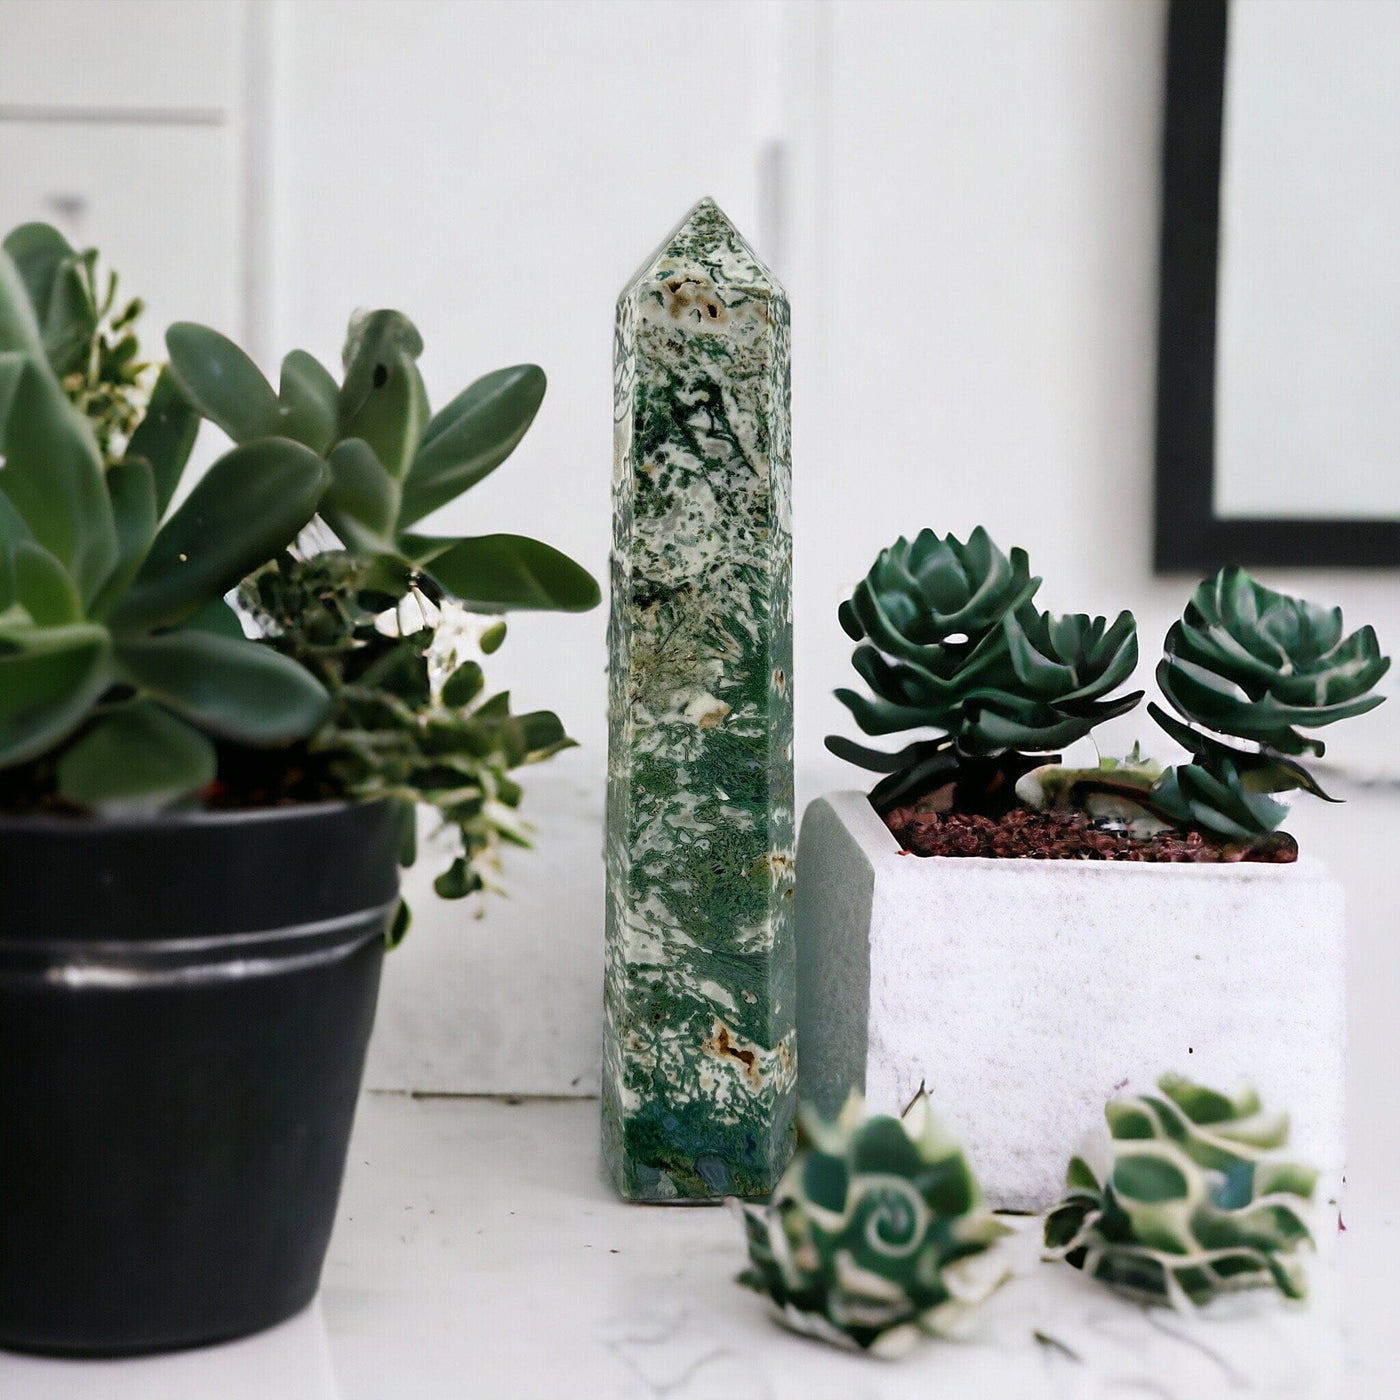 Moss Agate Tower - OOAK - OOAK with succulents on white marble countertop